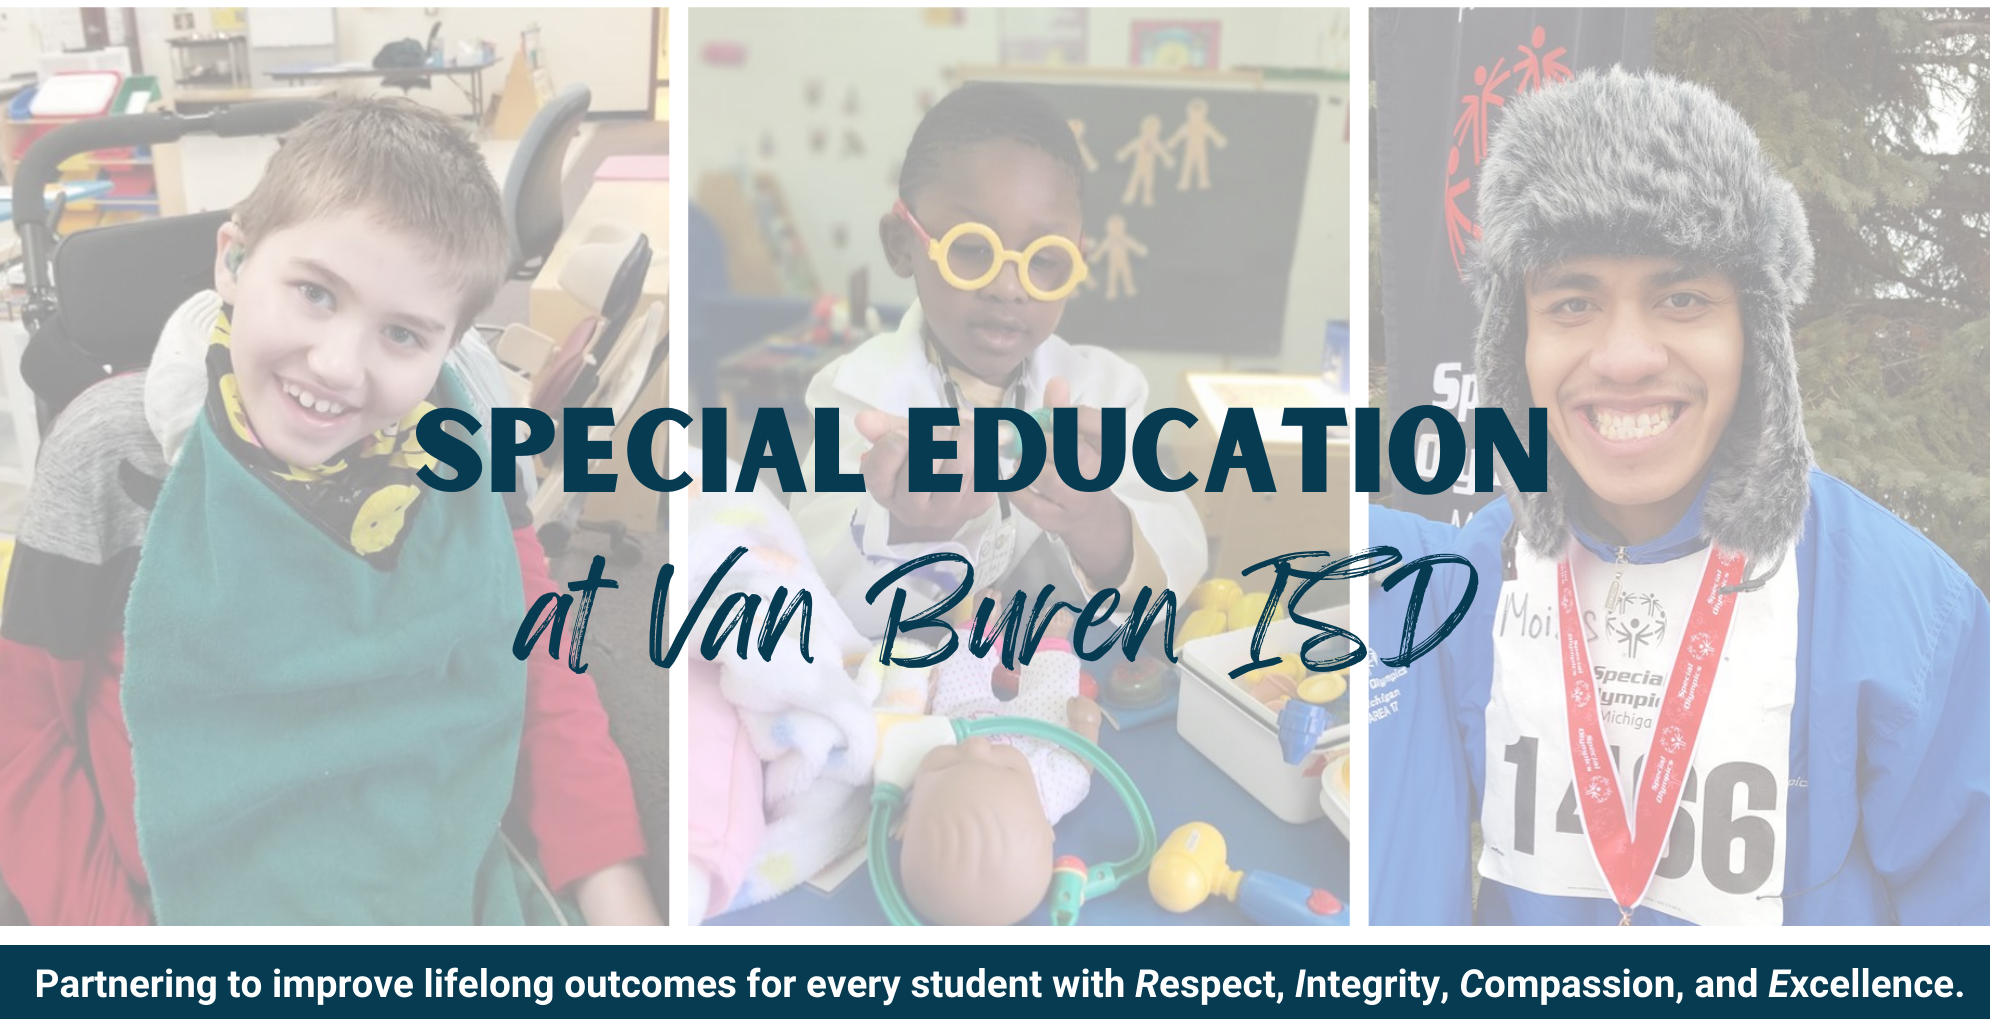 Photo compilation of three students: teenage female in wheelchair, young boy playing with doctor kit, and young adult male at Special Olympics. Overlaid with text "Special Education at Van Buren ISD" and "Partnering to improve lifelong outcomes for every student with Respect, Integrity, Compassion, and Excellence."